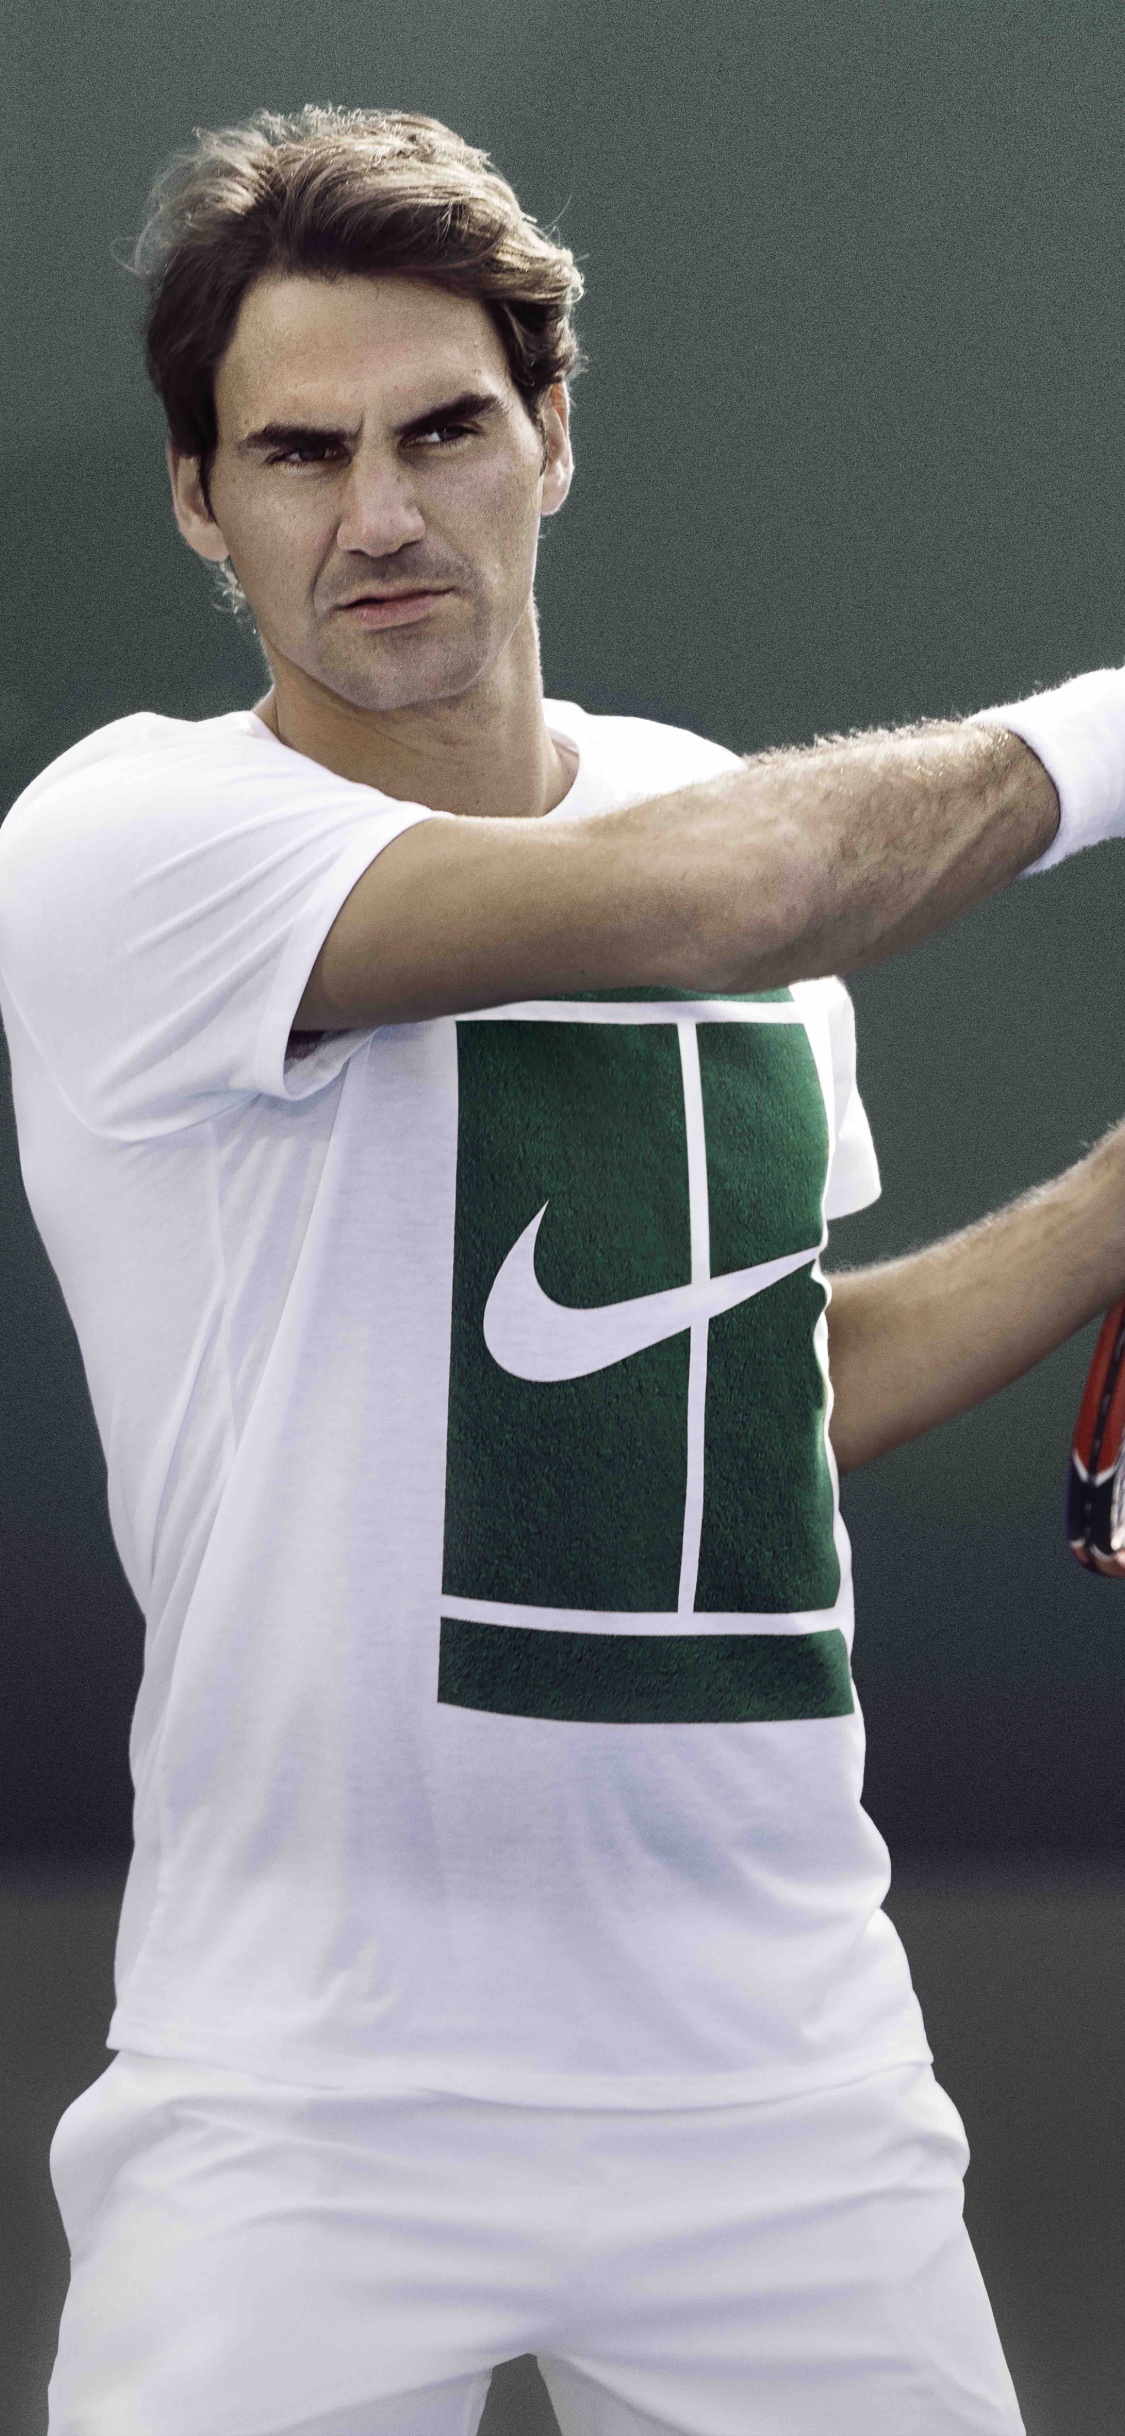 Man in Green and White Nike Jersey Shirt Holding Red and White Tennis Racket. Wallpaper in 1125x2436 Resolution